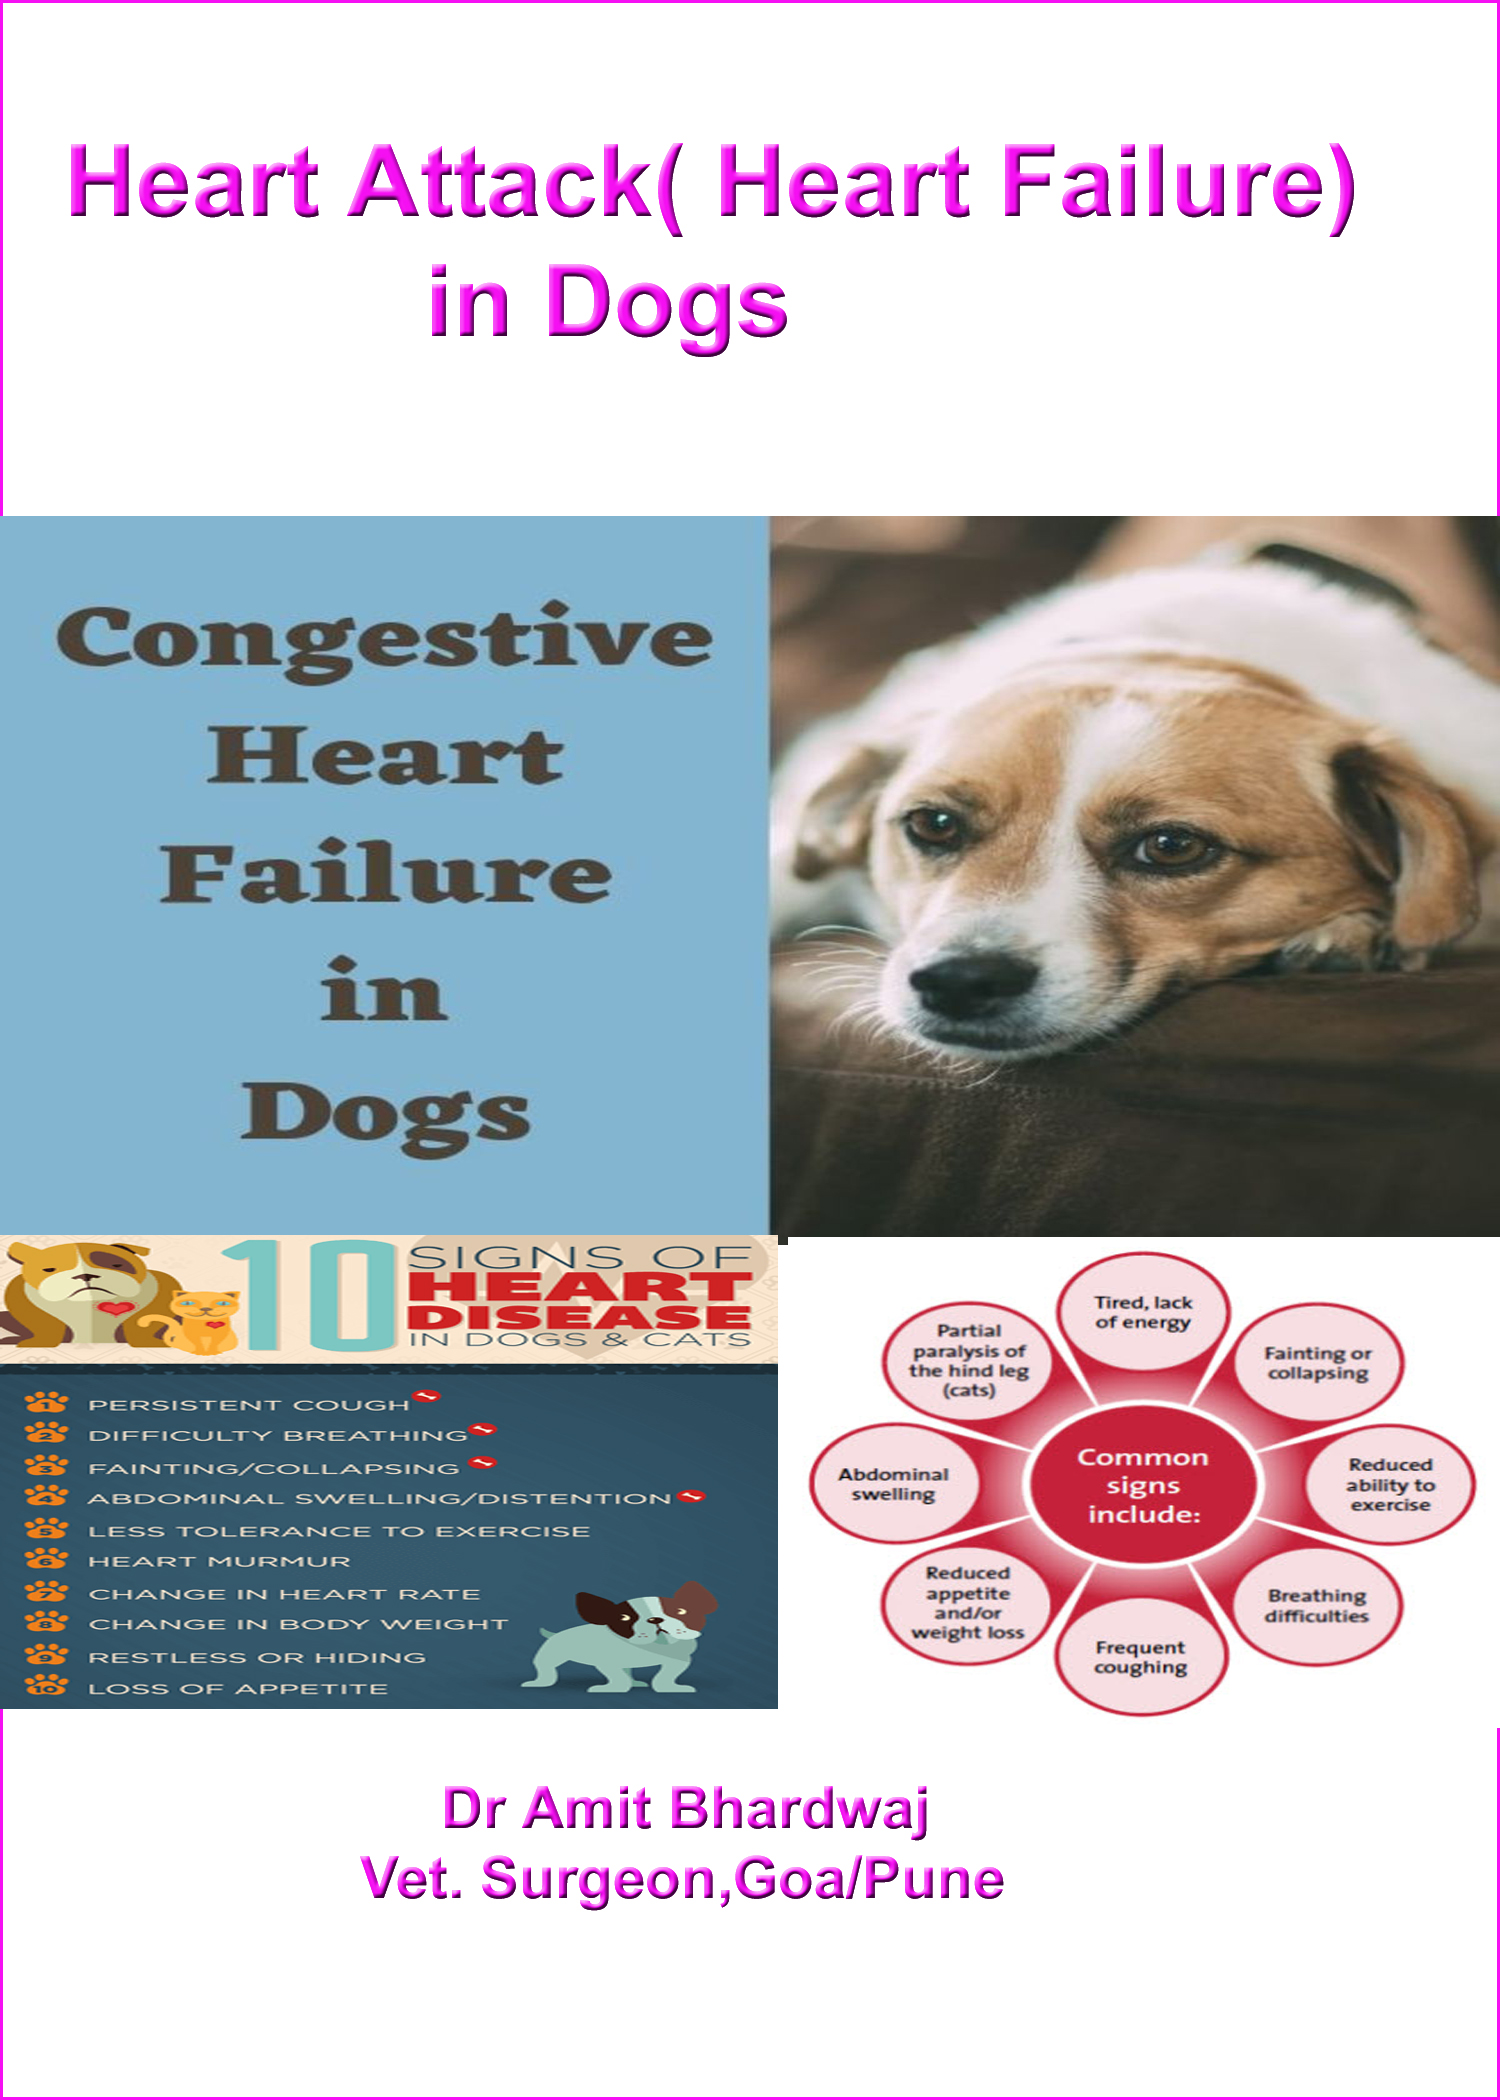 what are the signs of heart failure in a dog